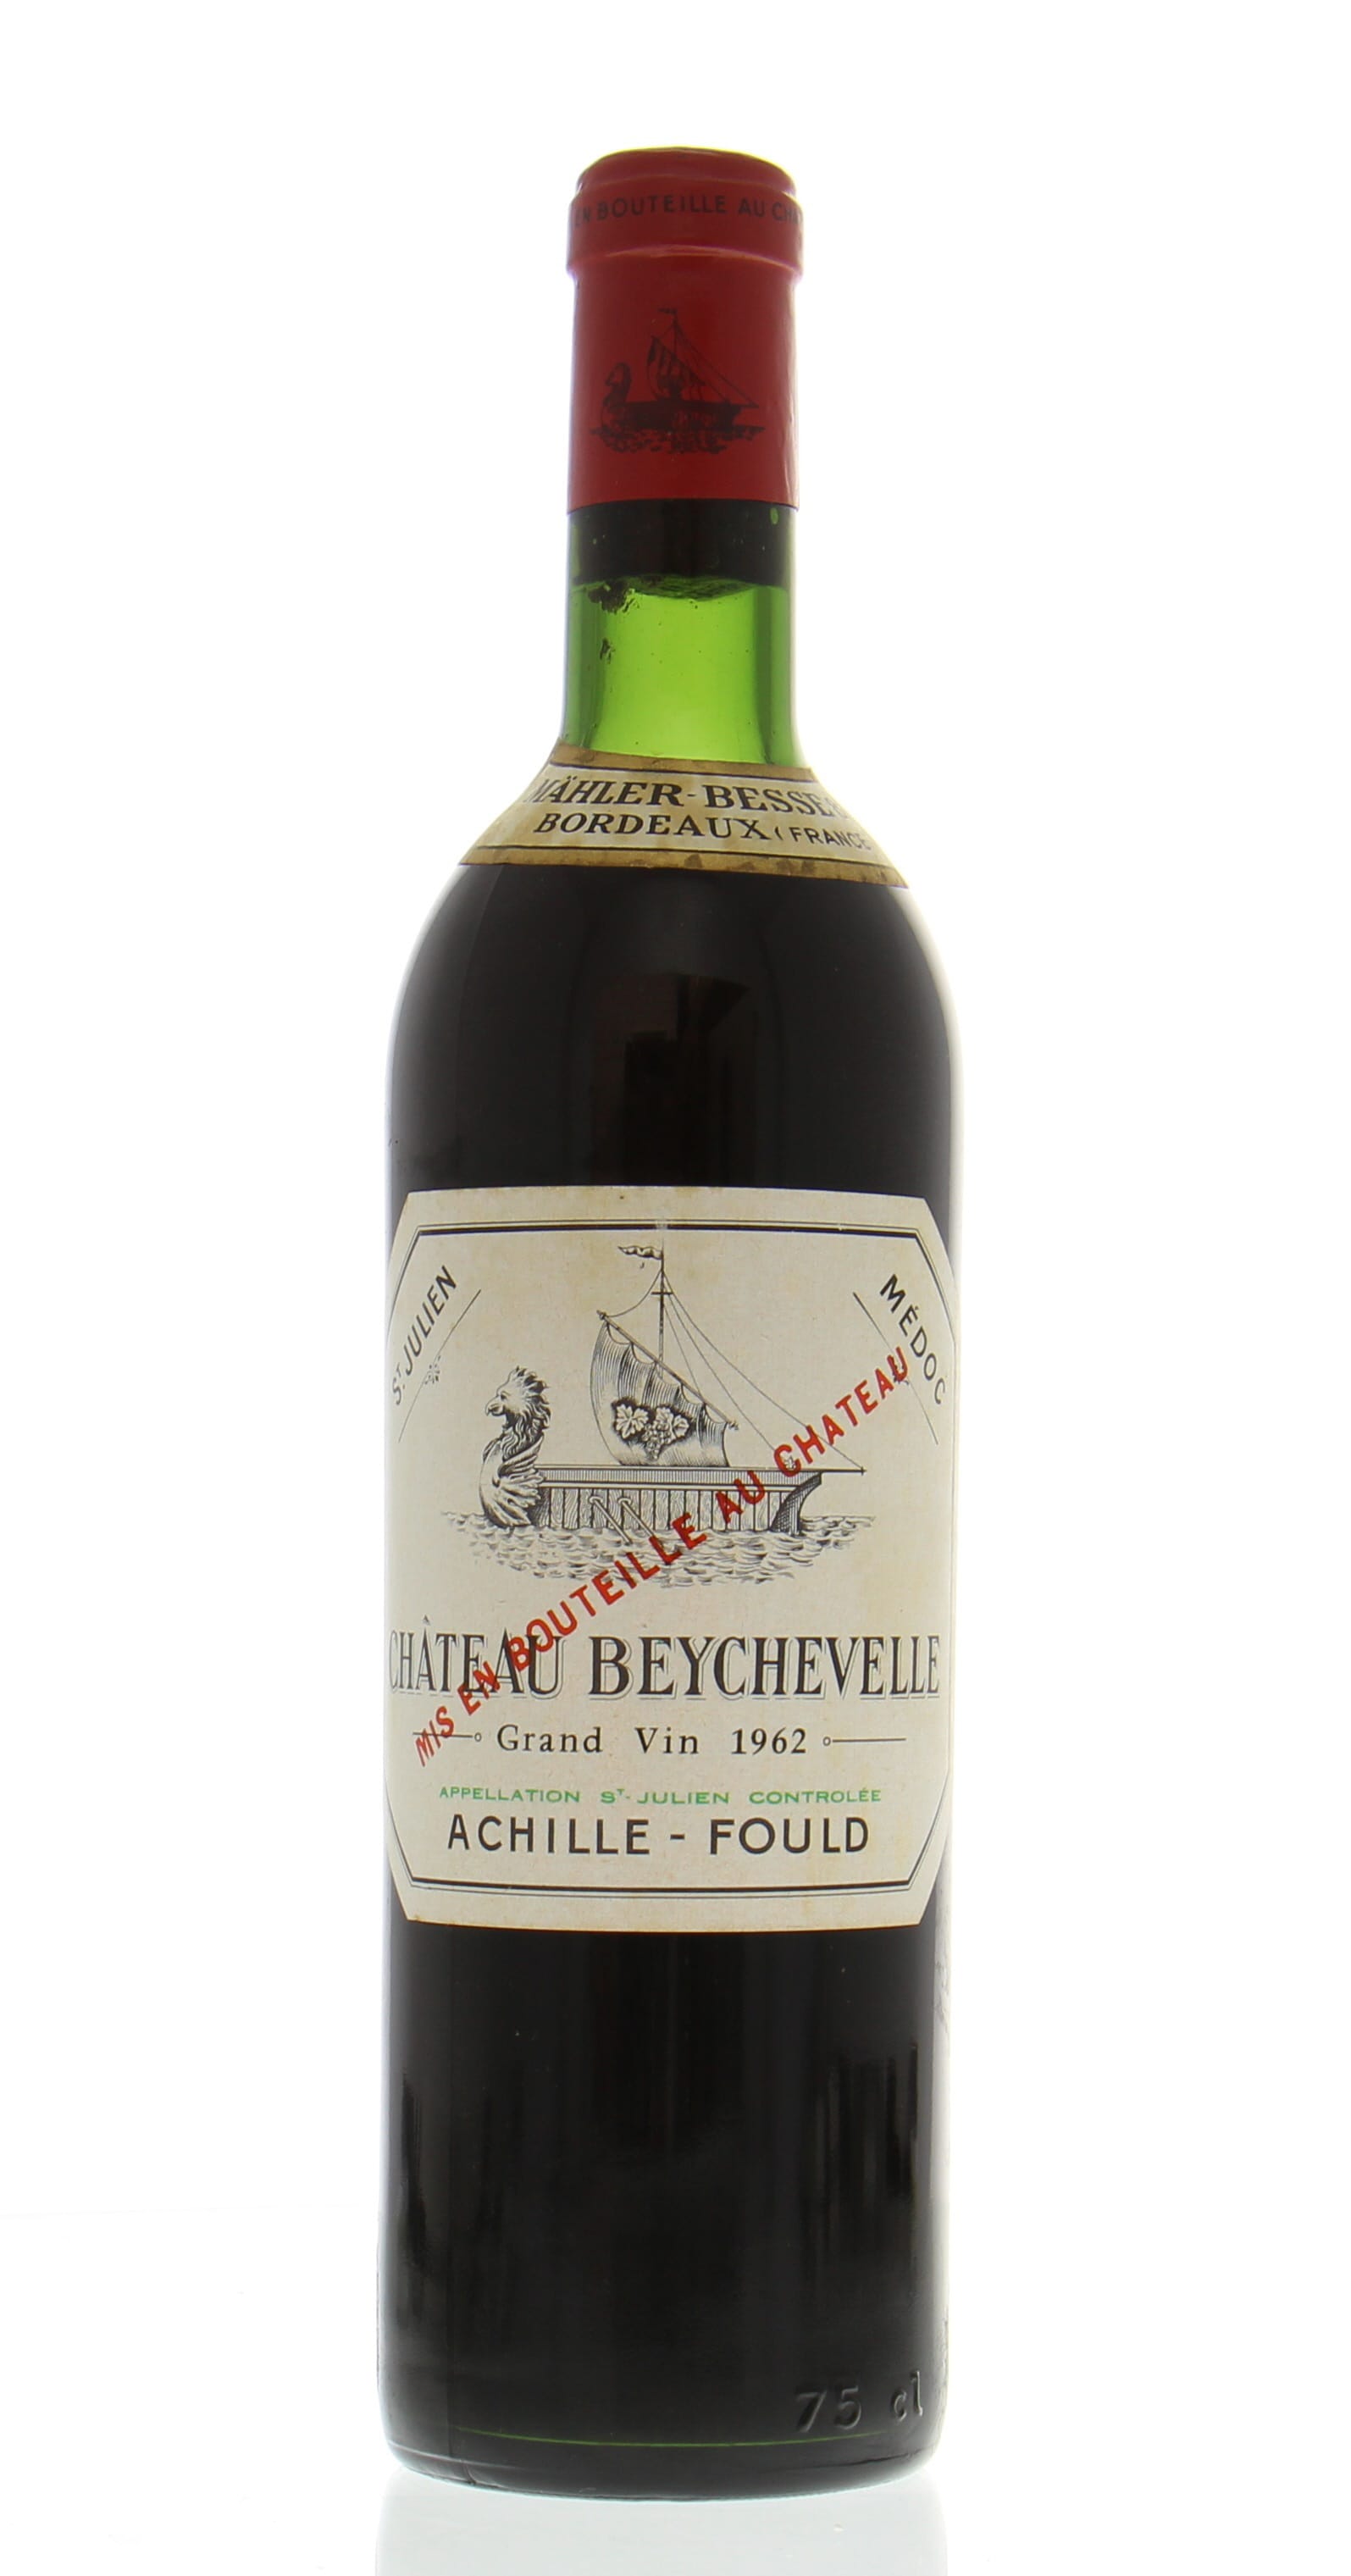 Chateau Beychevelle - Chateau Beychevelle 1962 top shoulder